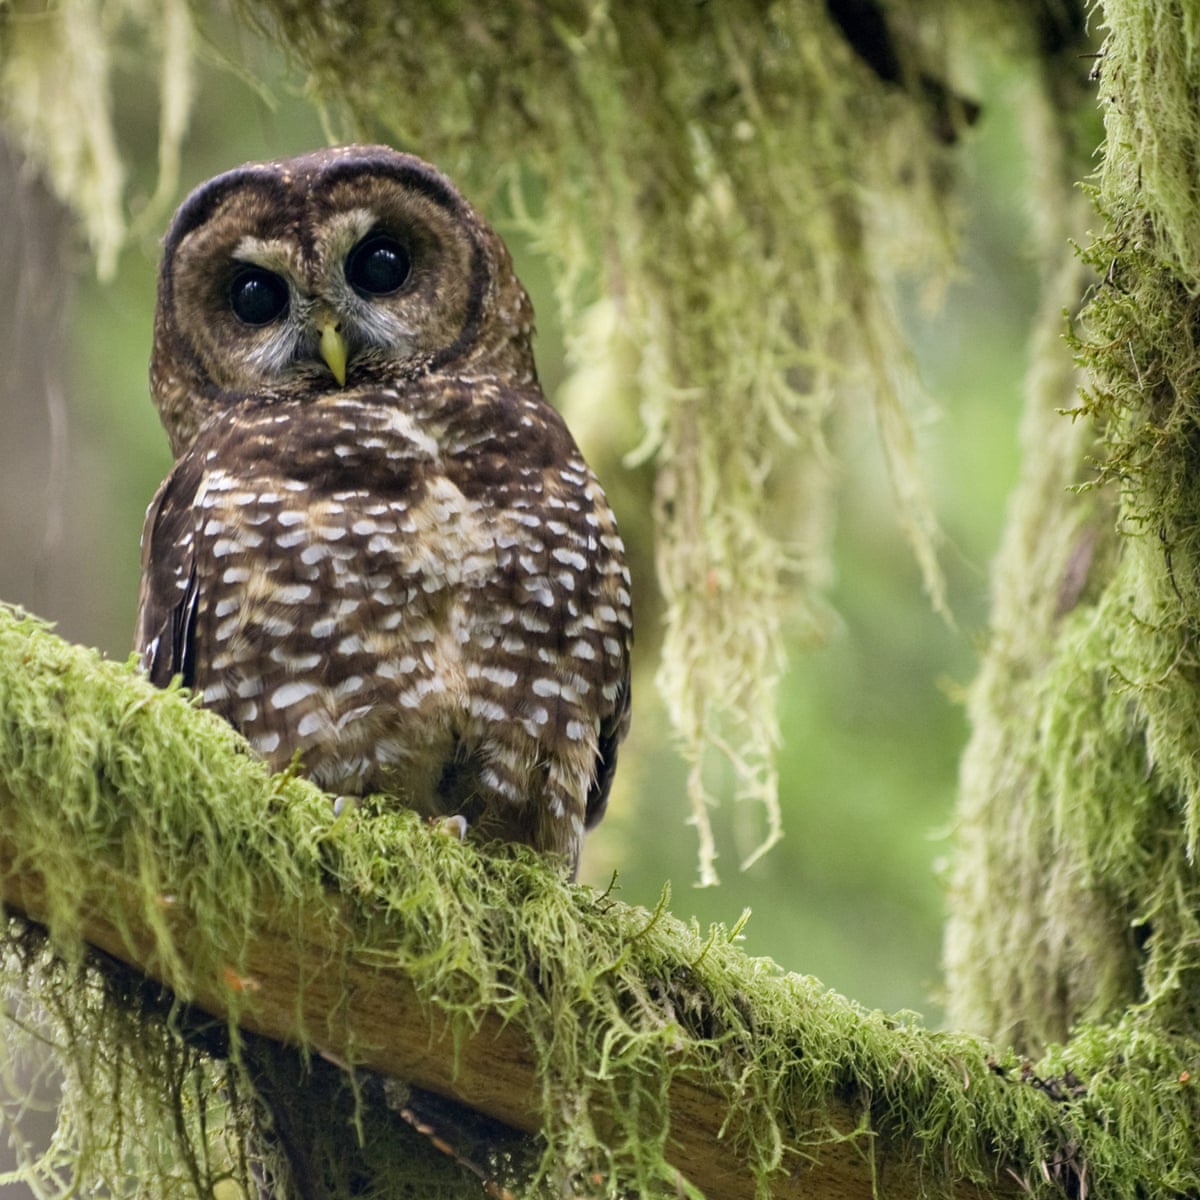 How Canada is trying to protect its last three spotted owls | Environment | The Guardian